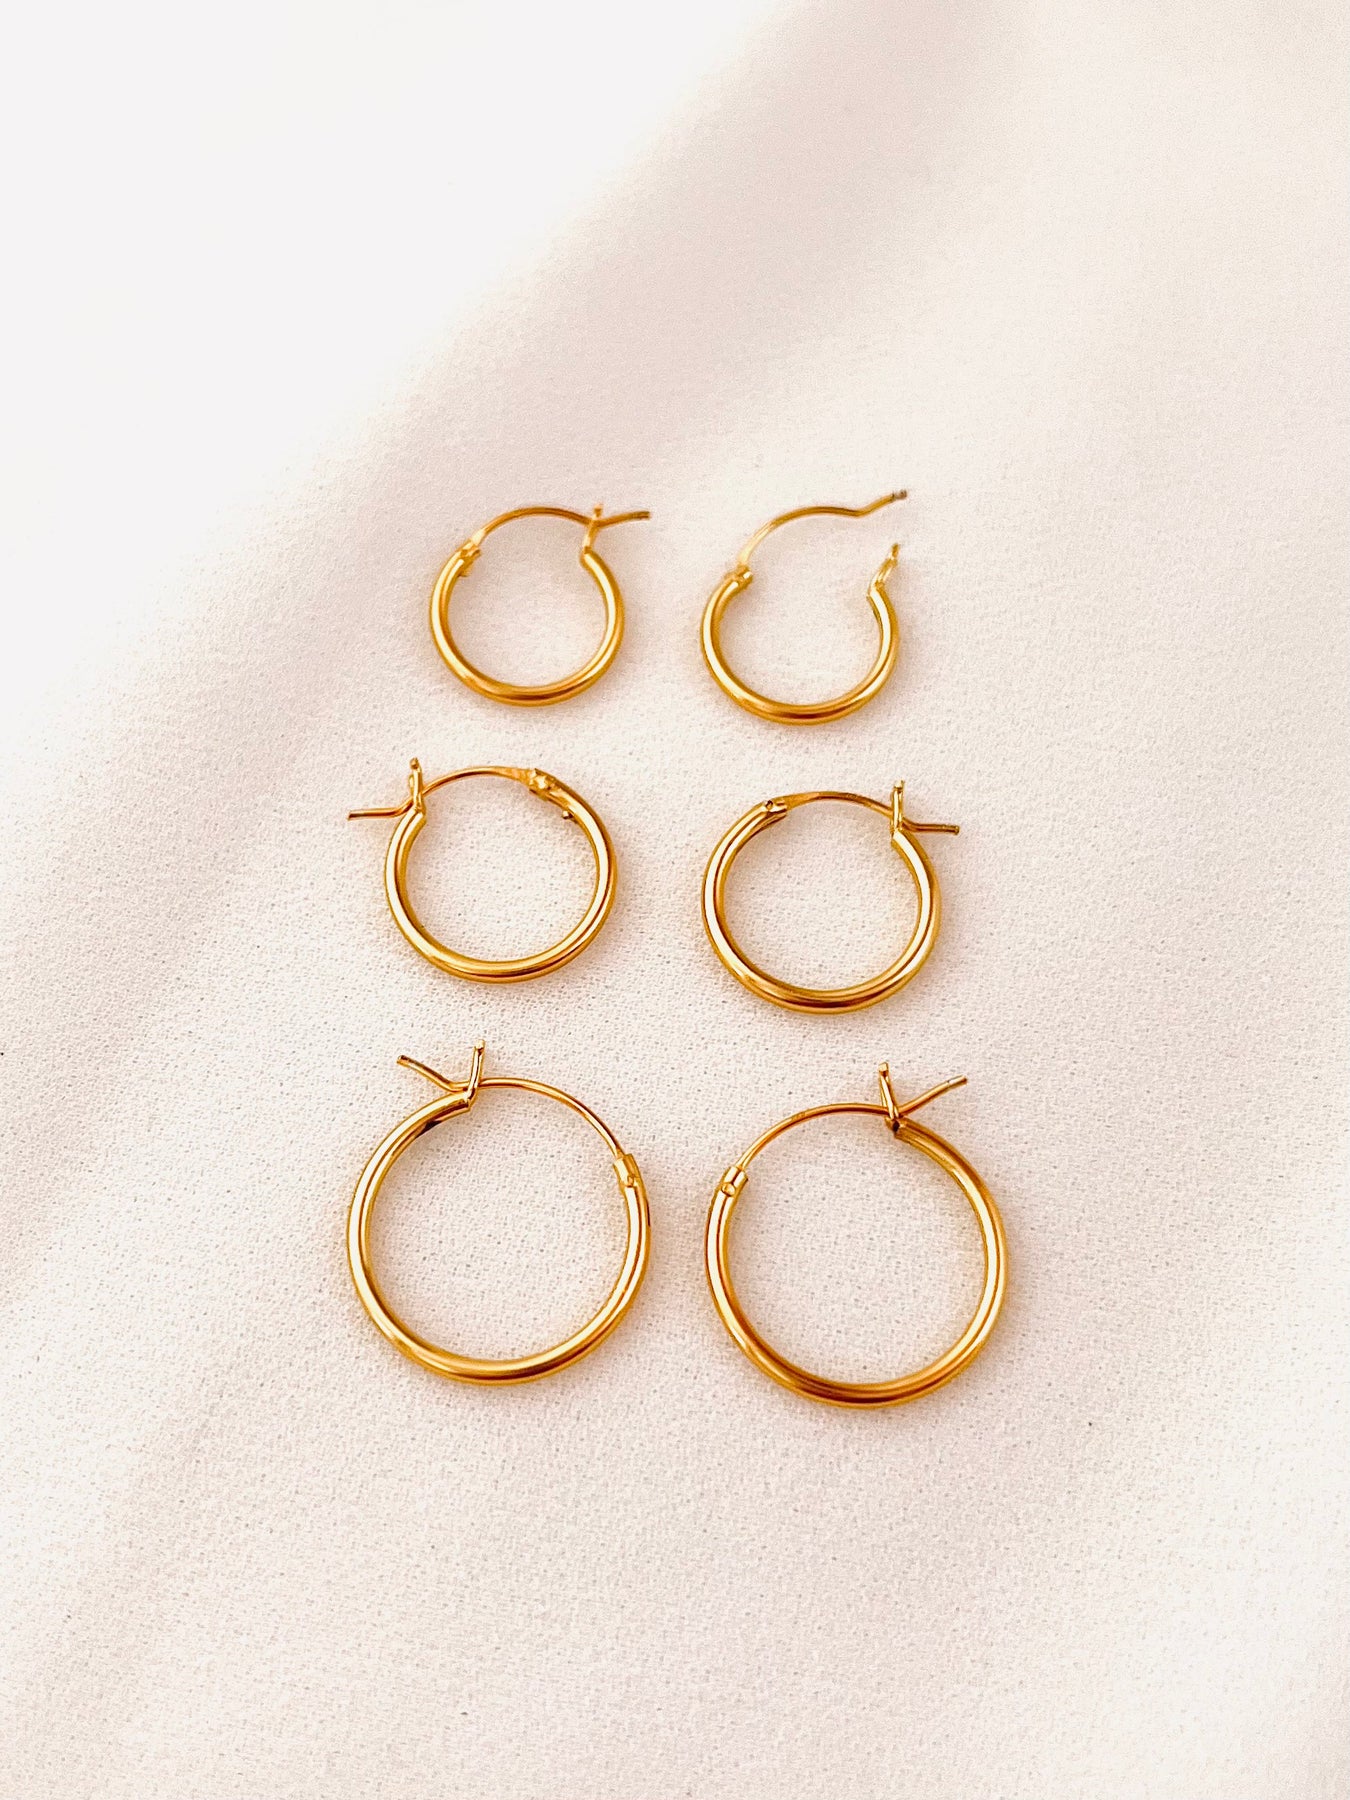 4mm Open Circle Stud Earrings 018 – Patination Design